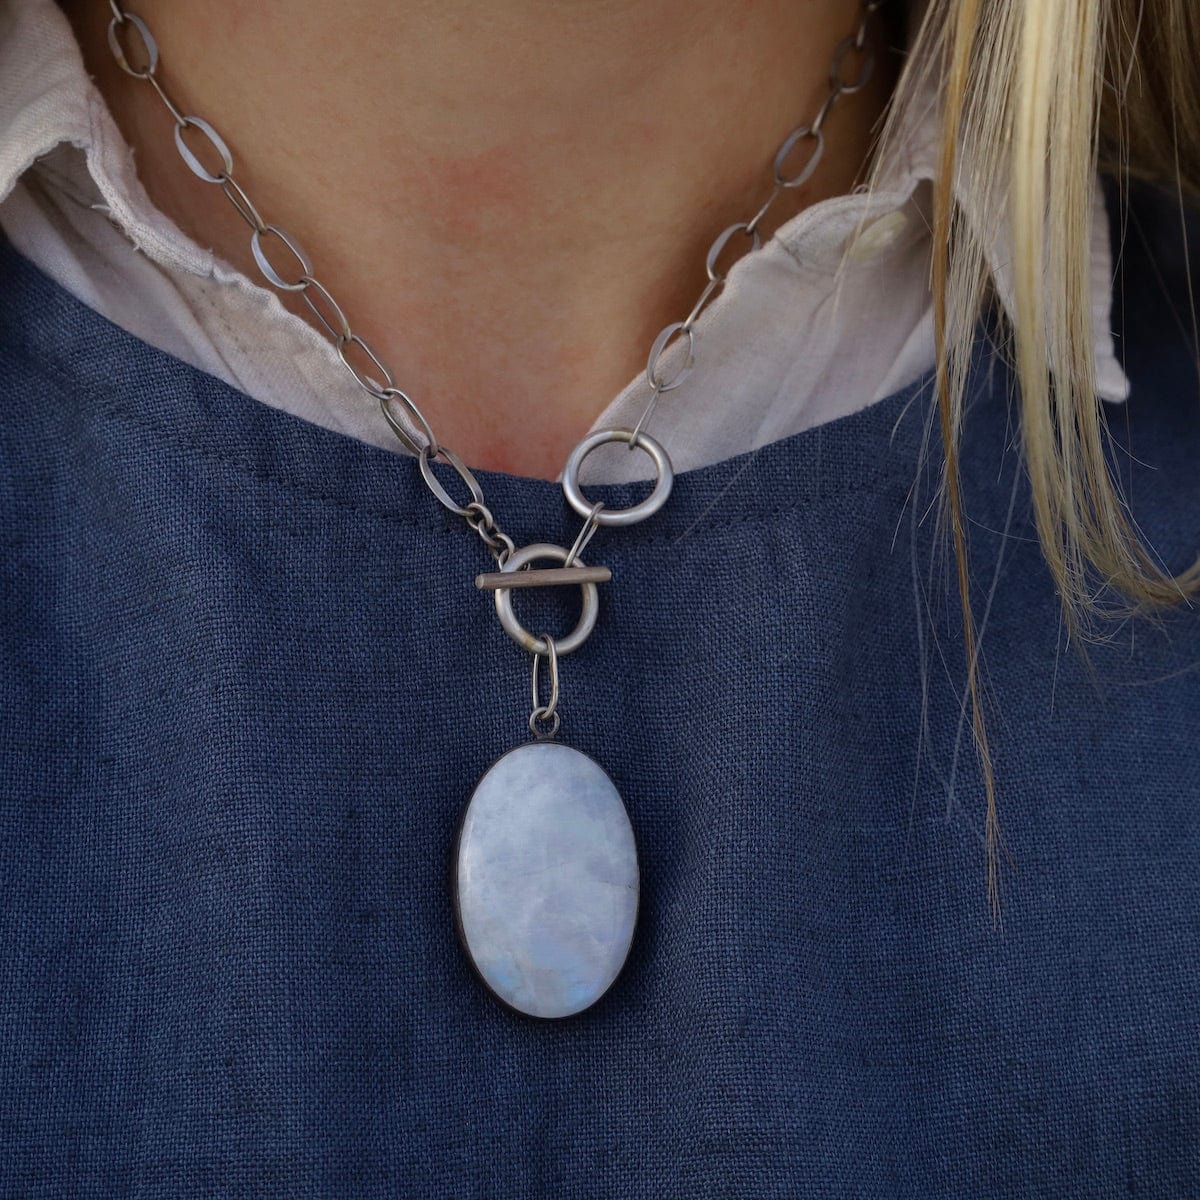 NKL Oval Cabochon Rainbow Moonstone Toggle Necklace